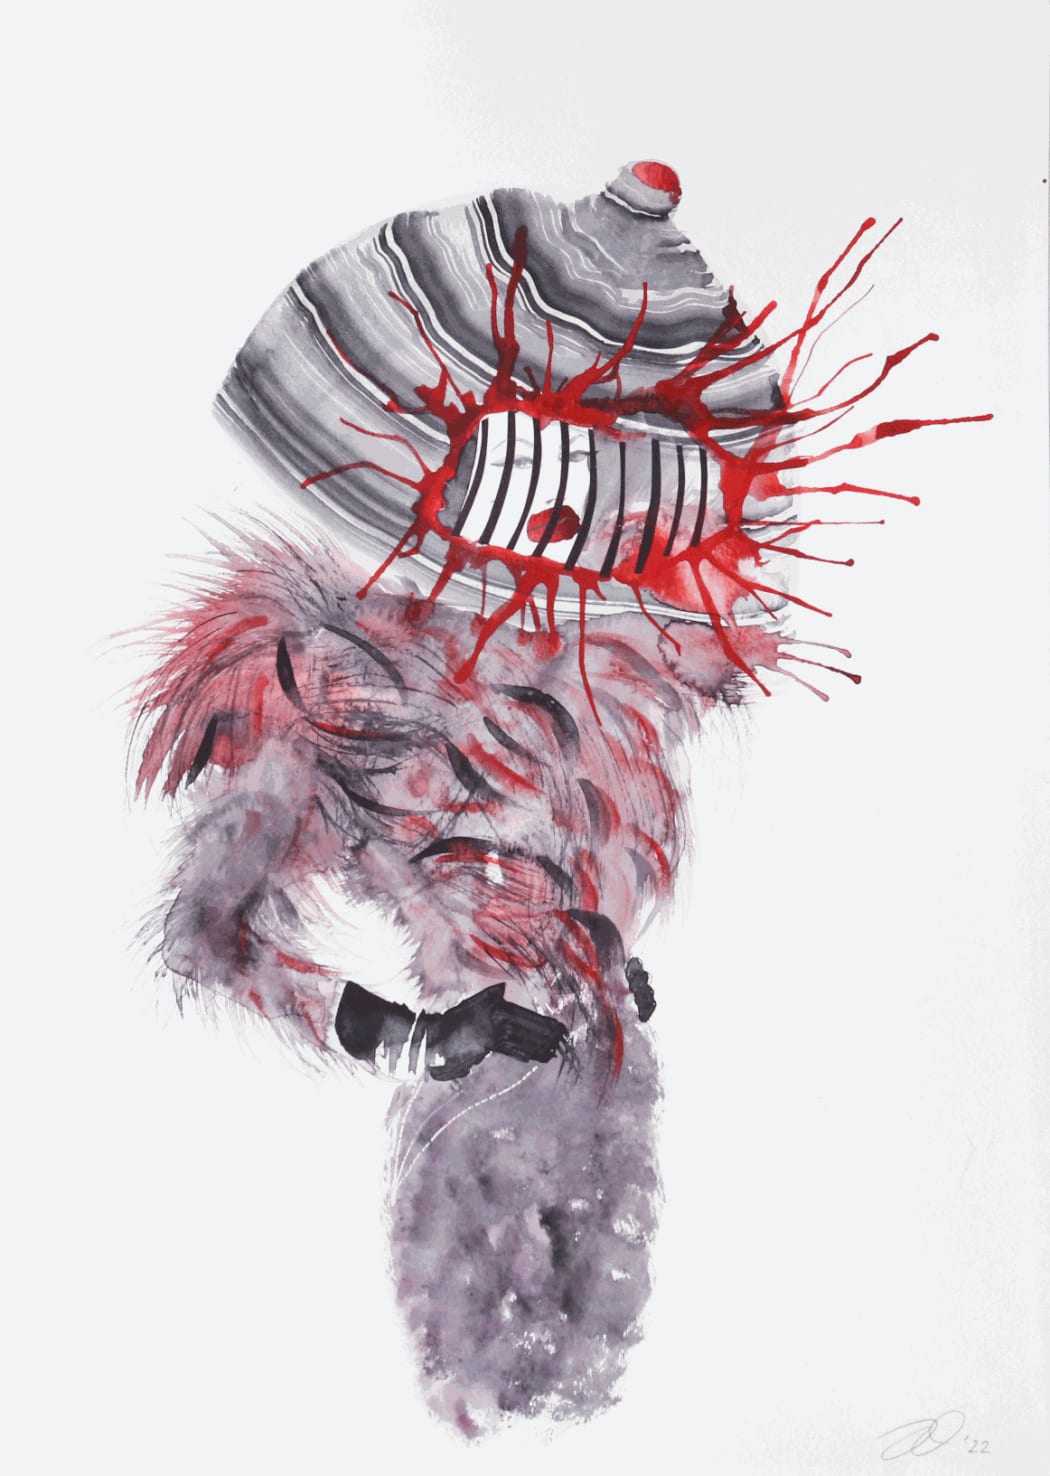 Isher Dhiman. Alexander McQueen II, 2022. Fashion illustration using mixed media on 350gm paper. 11.7 x 16.5 in.